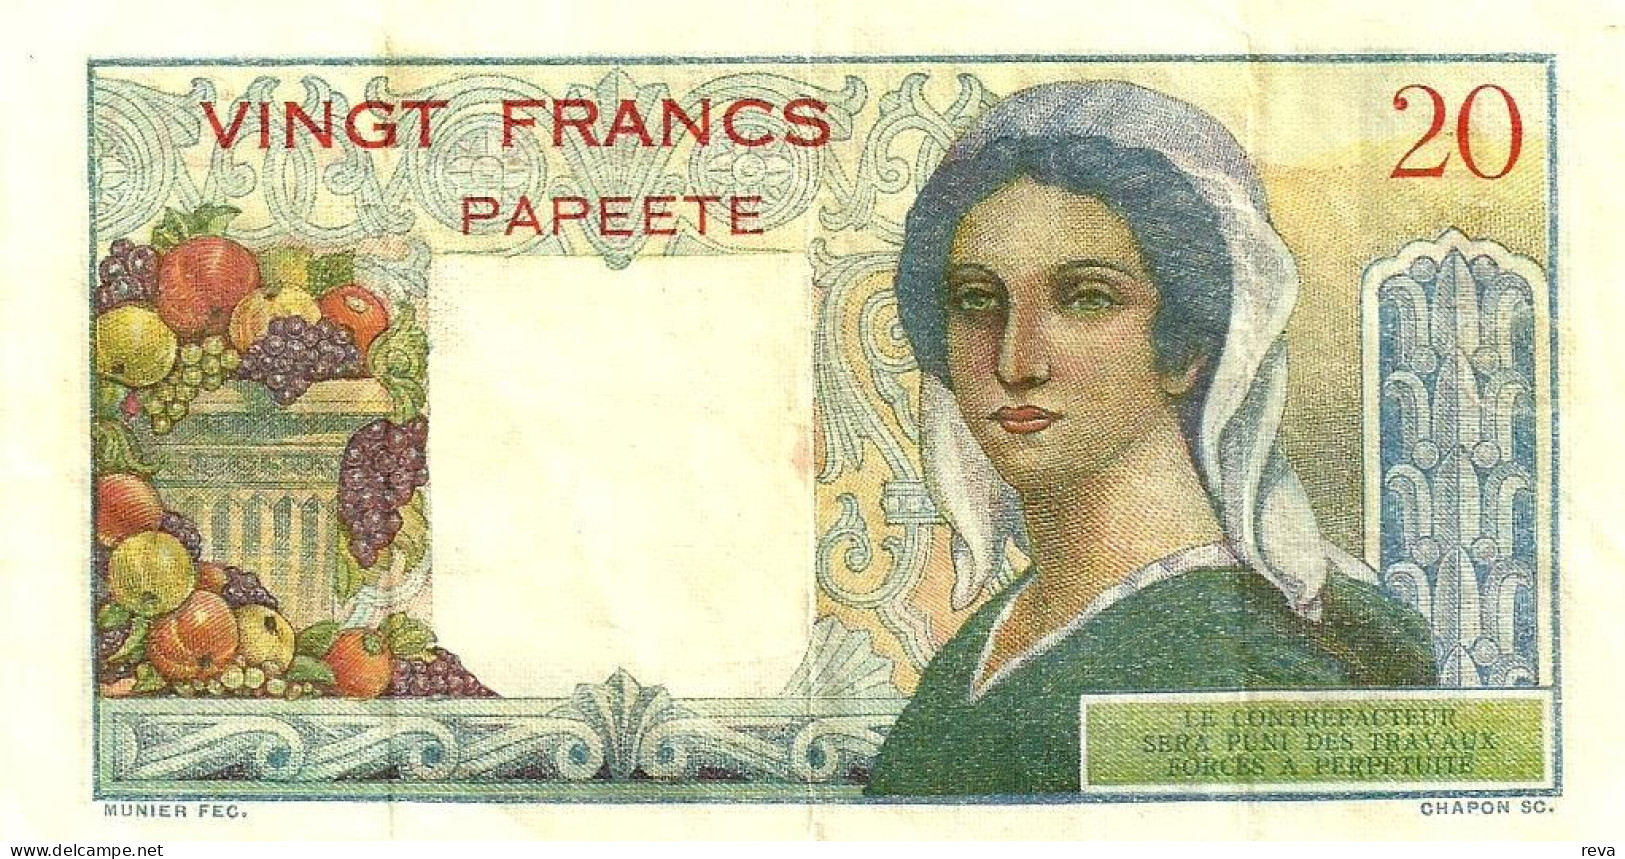 FRENCH POLYNESIA 20 FRANCS GREY MAN HEAD FRONT WOMAN BACK NOT DATED(1963) P21c 3RD SIG VARIETY VF+ READ DESCRIPTION!! - Papeete (Französisch-Polynesien 1914-1985)